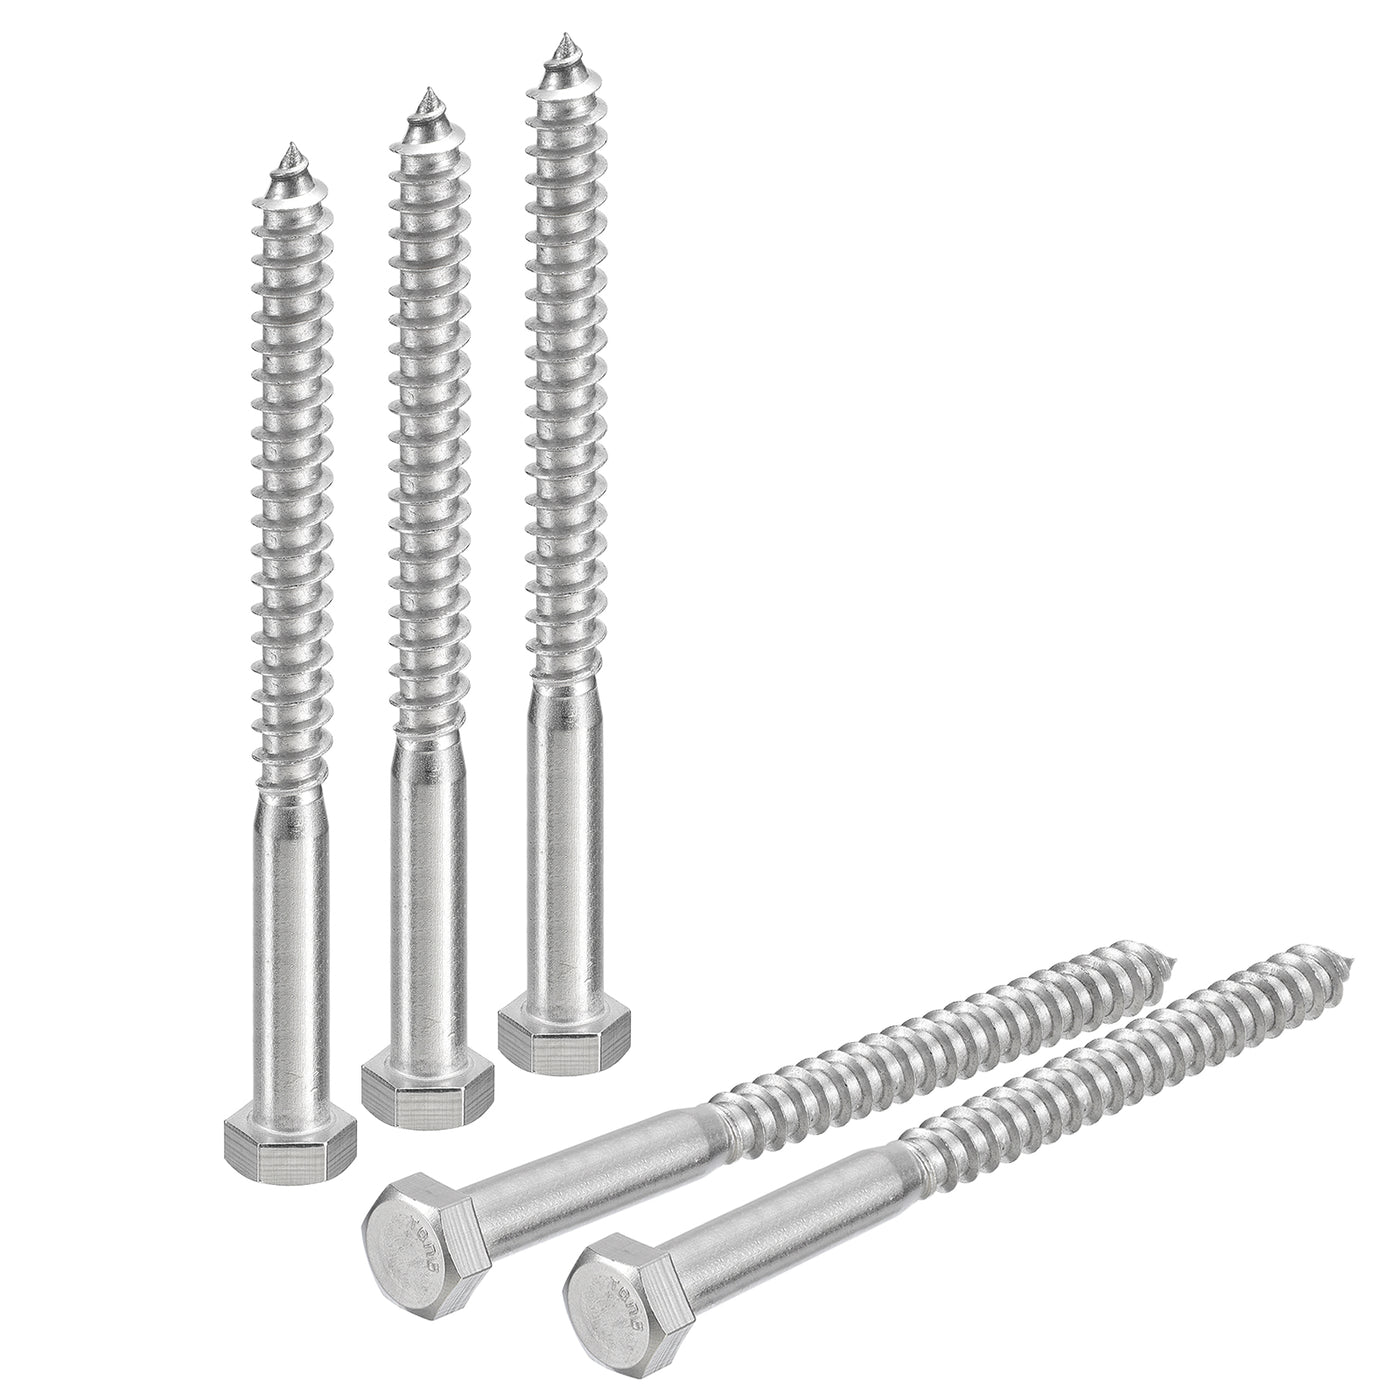 uxcell Uxcell Hex Head Lag Screws Bolts, 10pcs 3/8" x 5" 304 Stainless Steel Wood Screws